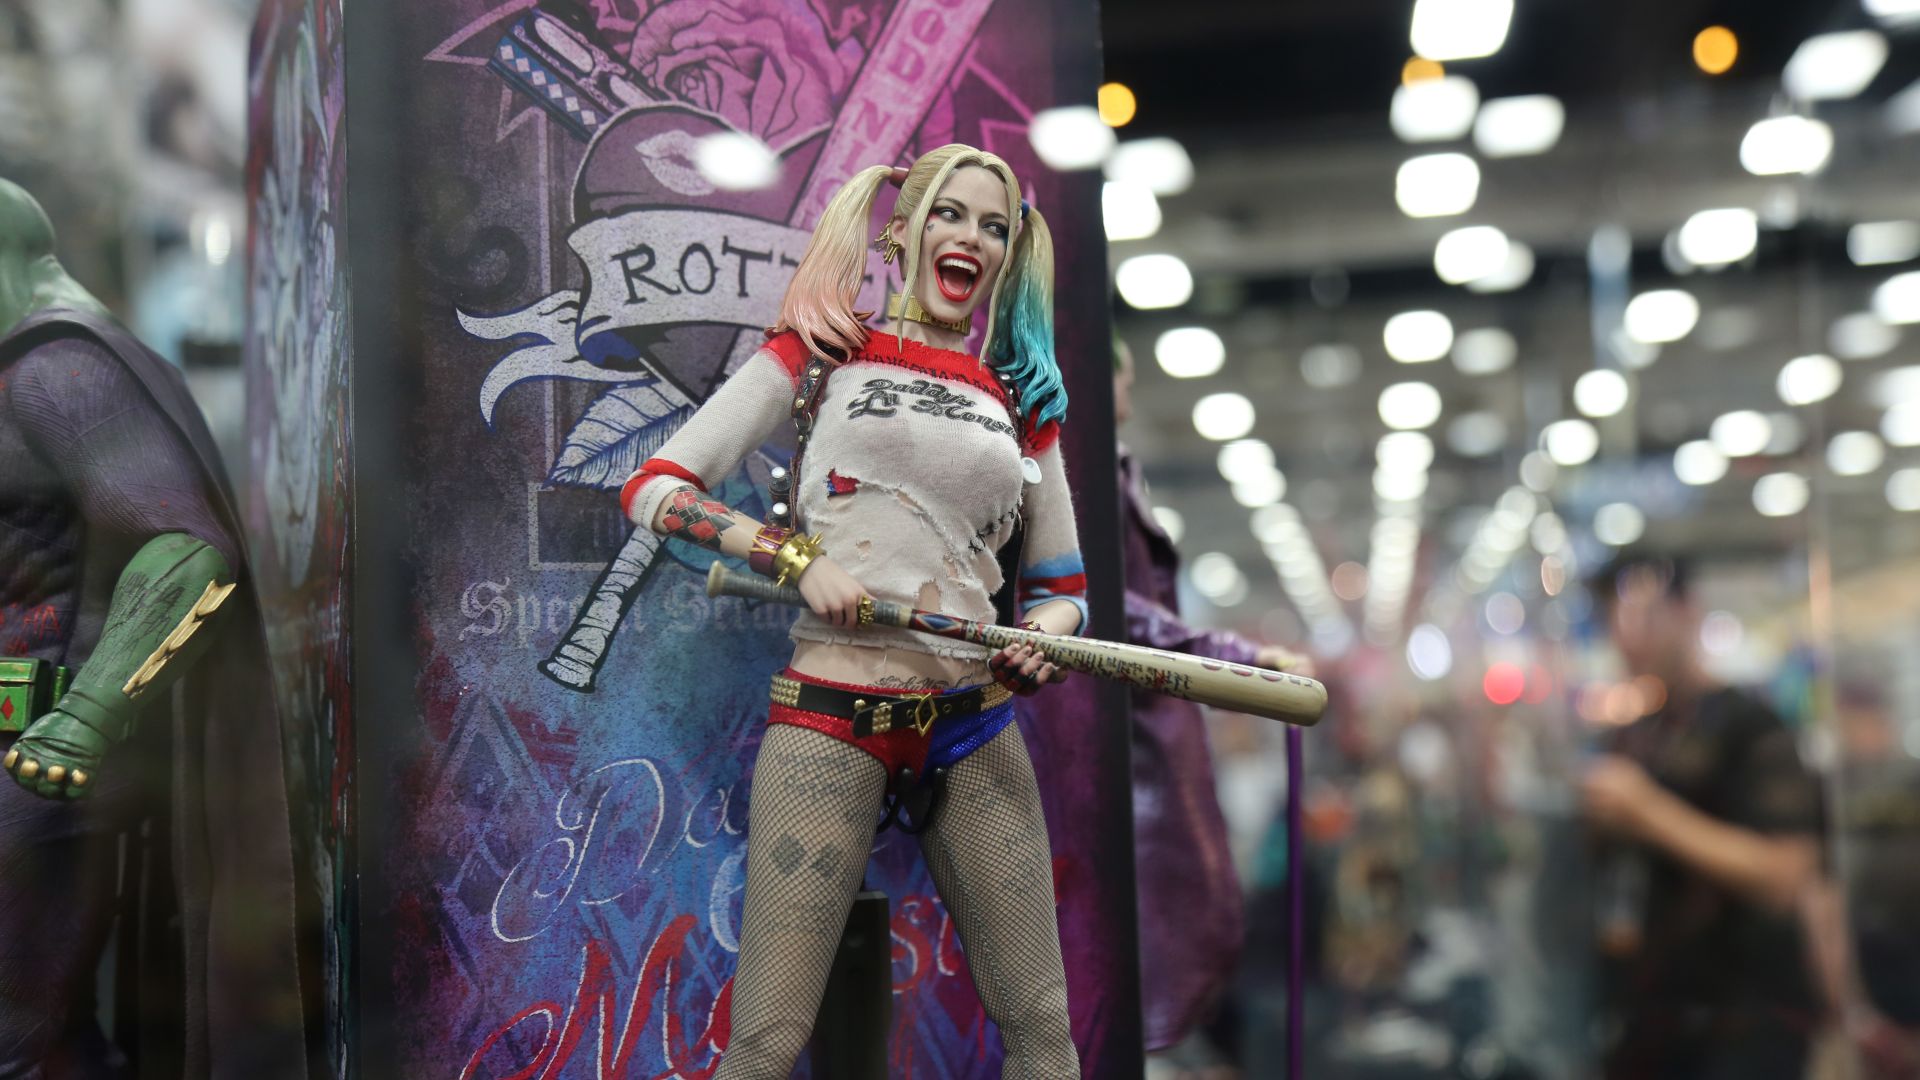 Harley quinn, Suicide Squad, Margot Robbie, Best Movies of 2016 (horizontal)